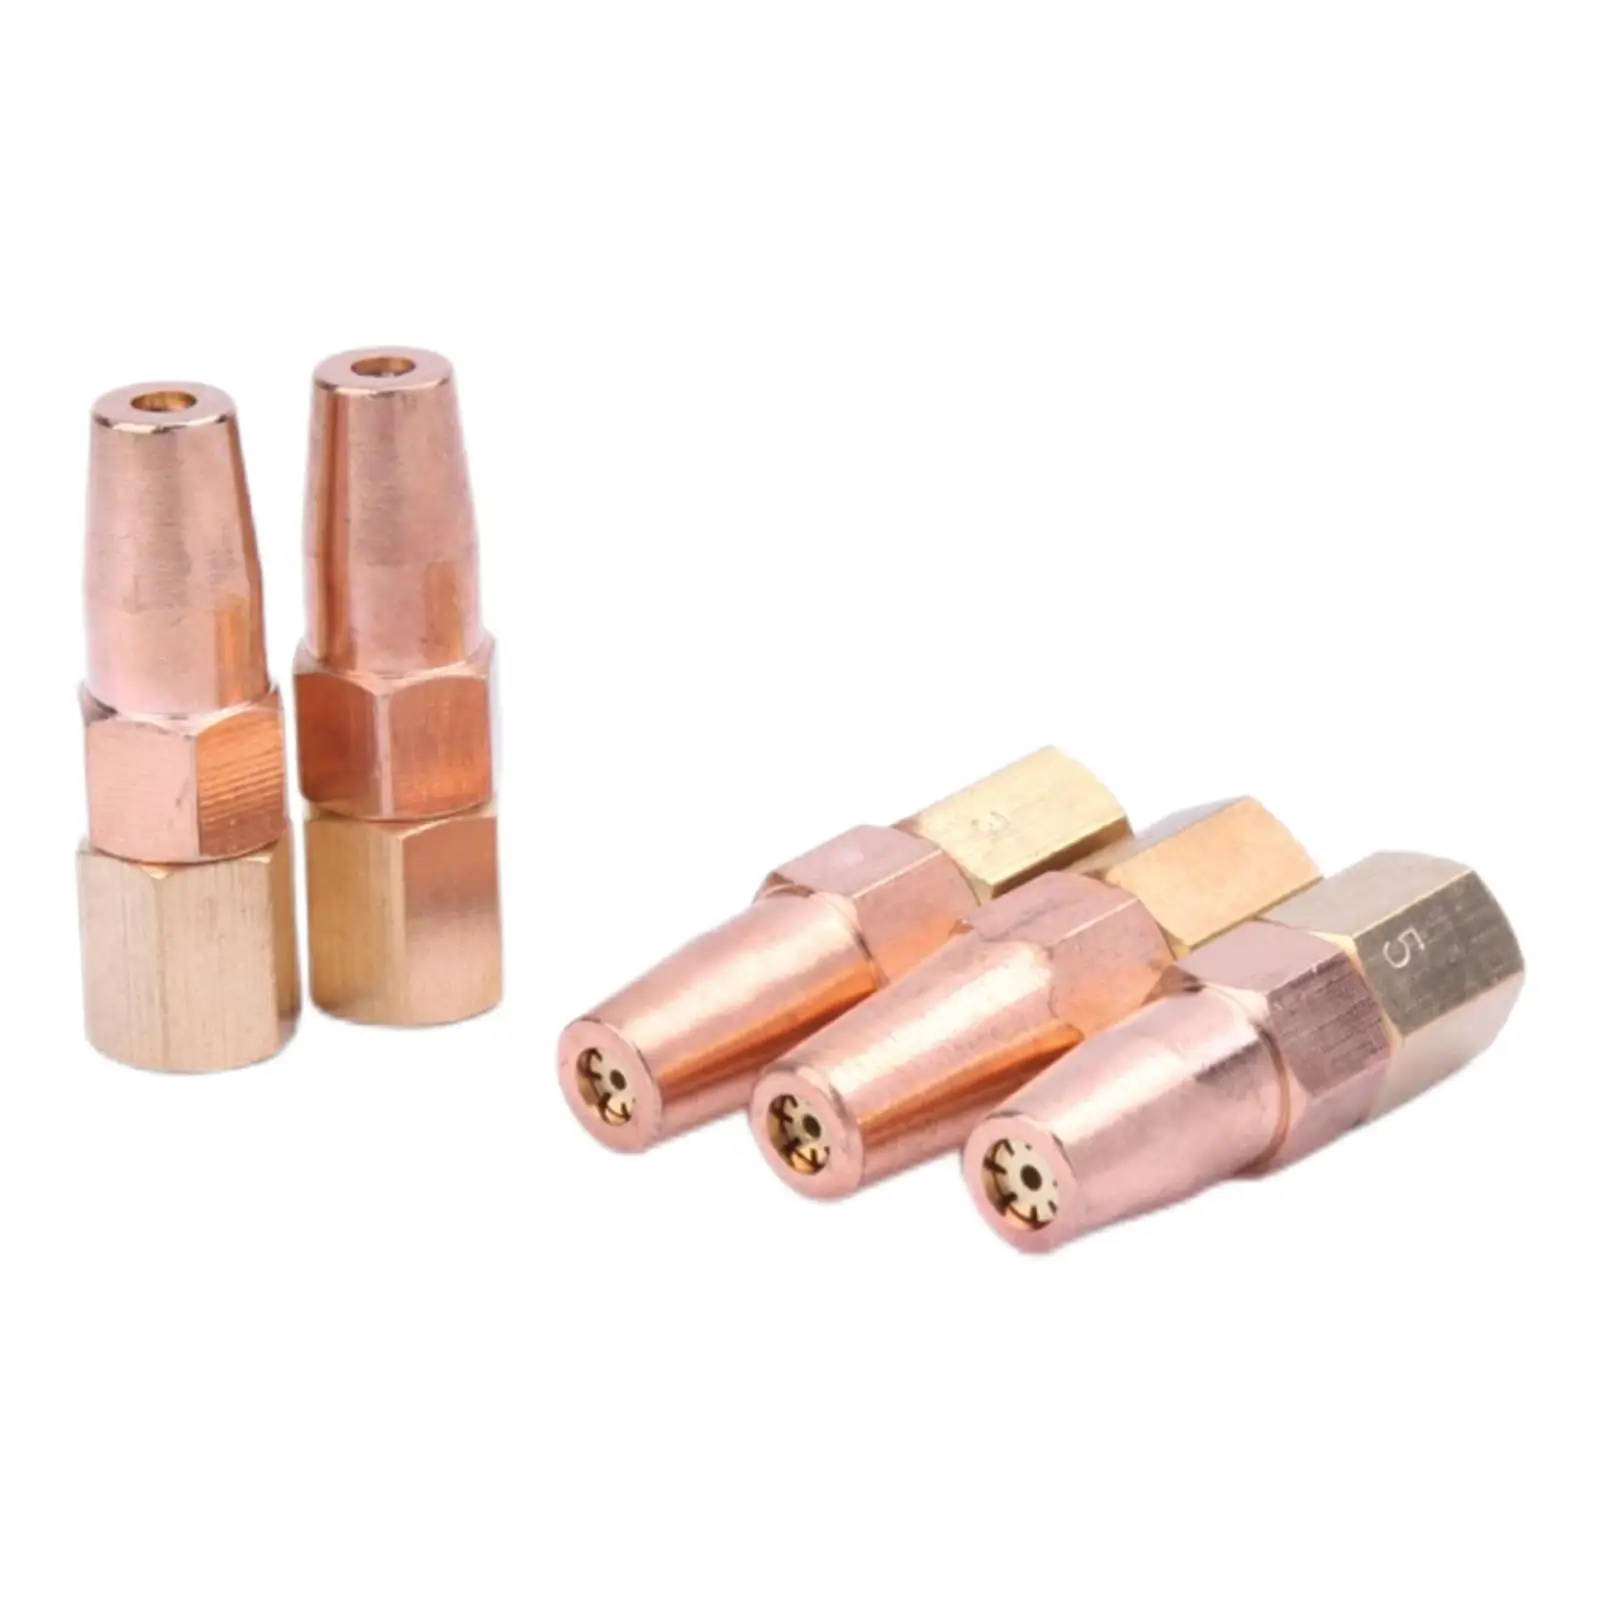 5x Propane Gas Welding Nozzle H01-6 Gas Nozzle for Heat Treating Thermal Metal Expansion Metal Bending Straightening